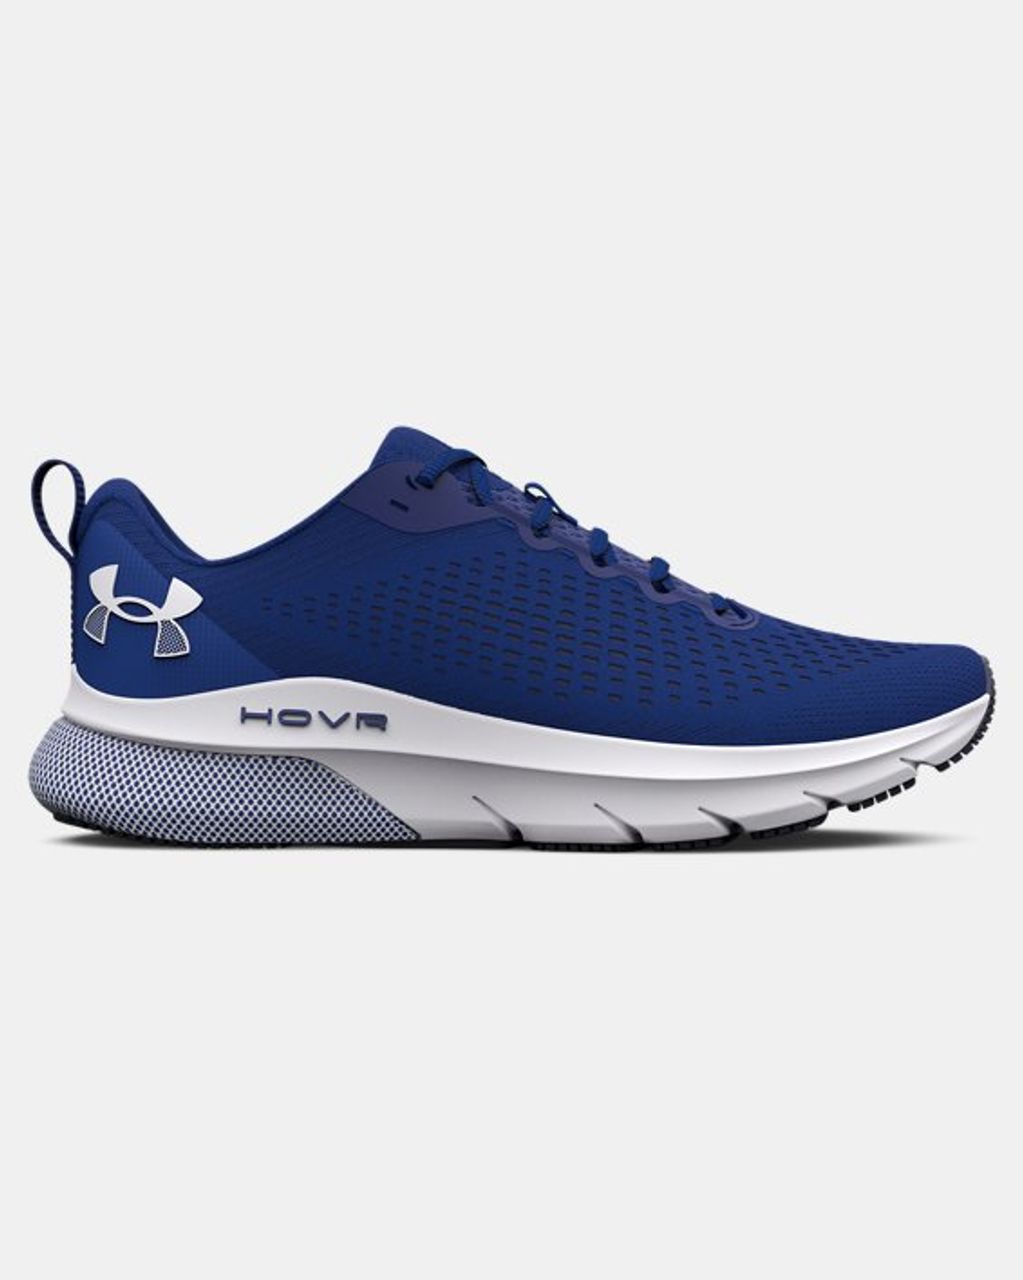 Under Armour Men's UA HOVR Turbulence Running Shoes 3025419-400-9.5 ...